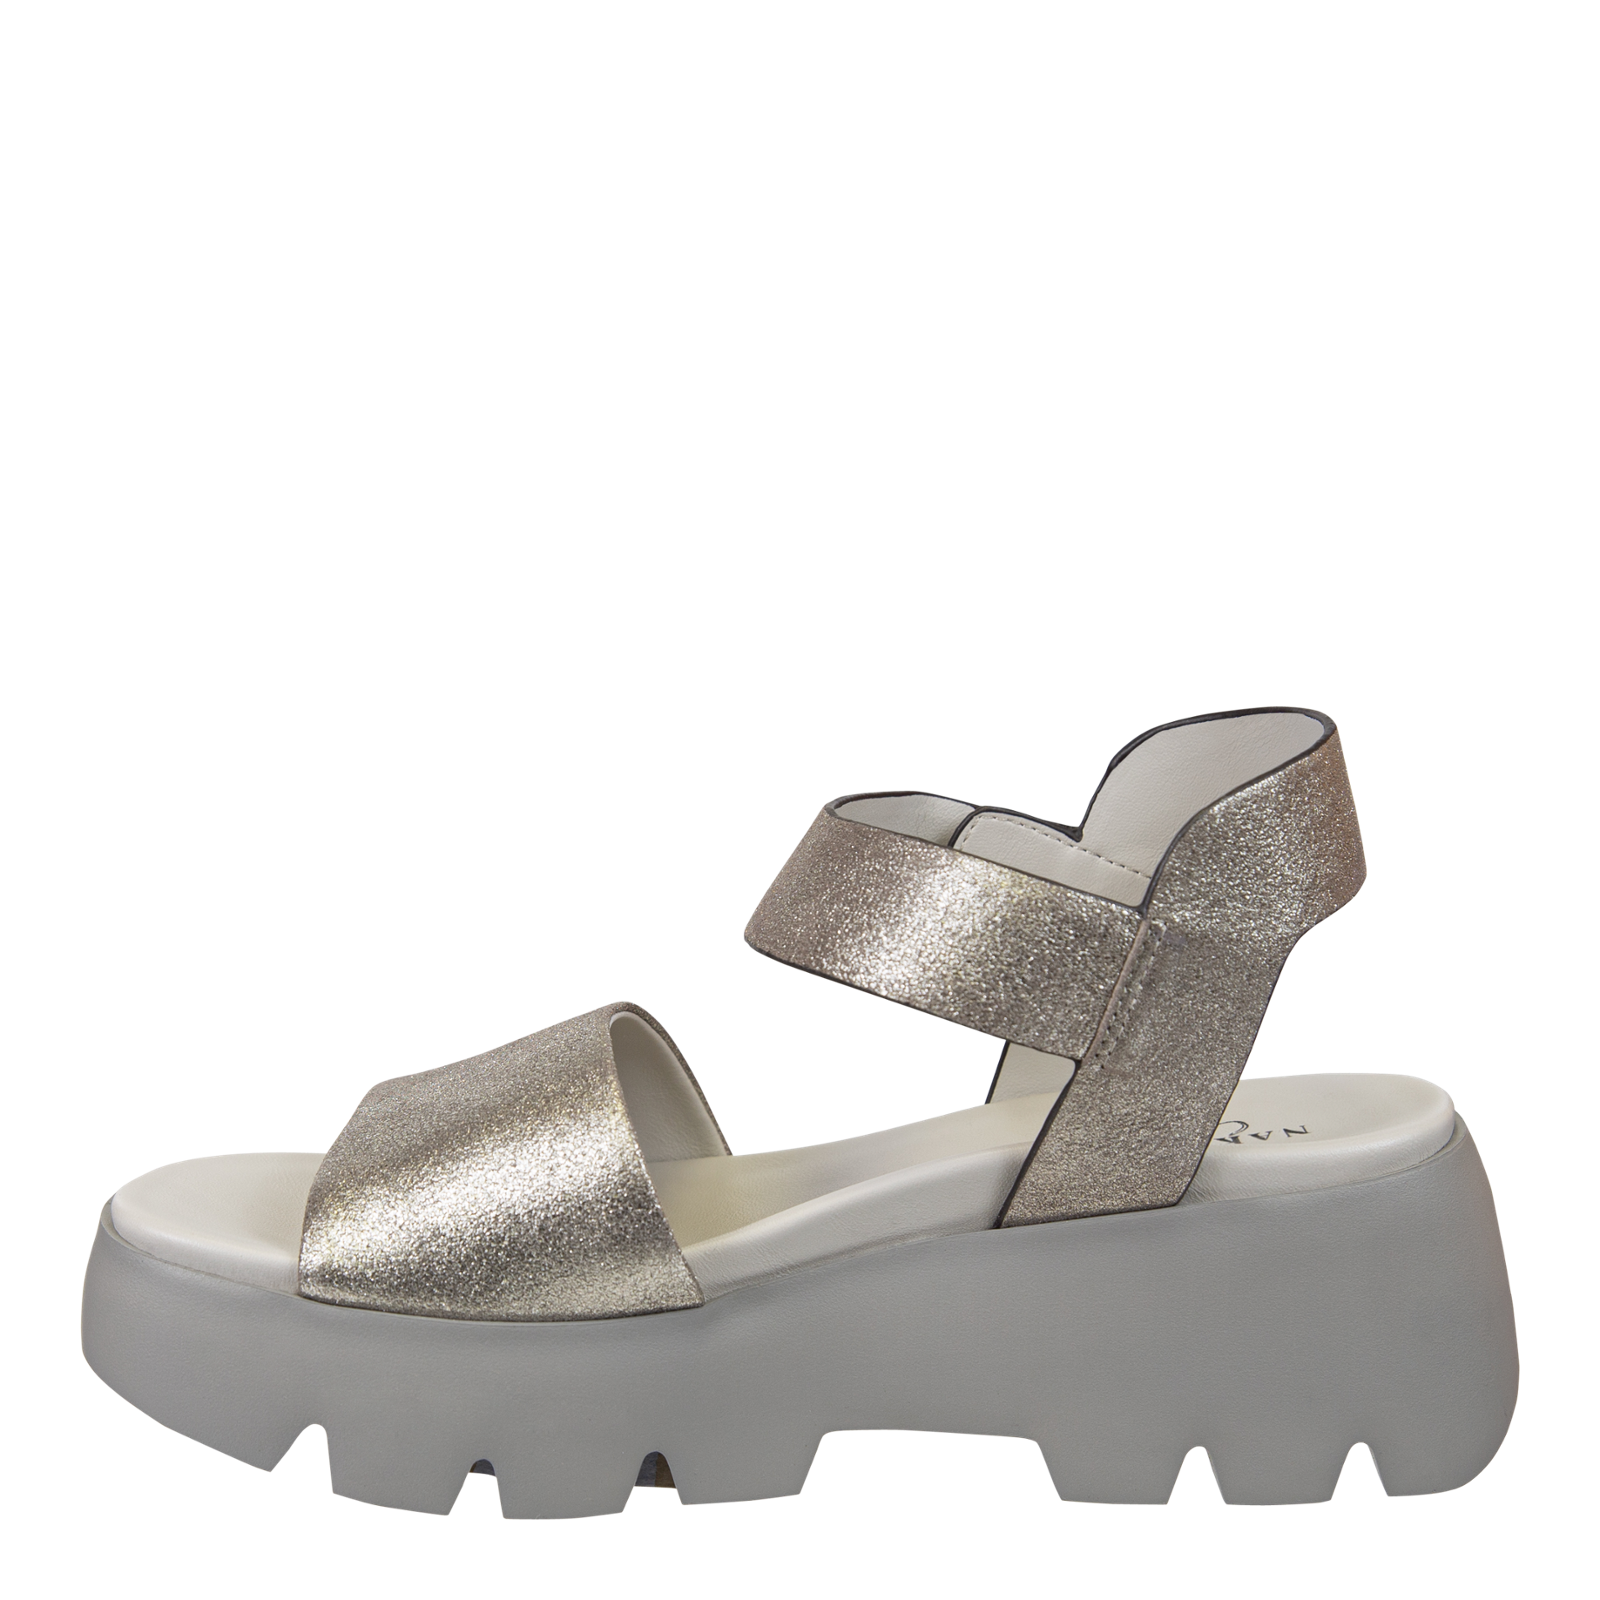 NAKED FEET - ALLOY in SILVER Platform Sandals